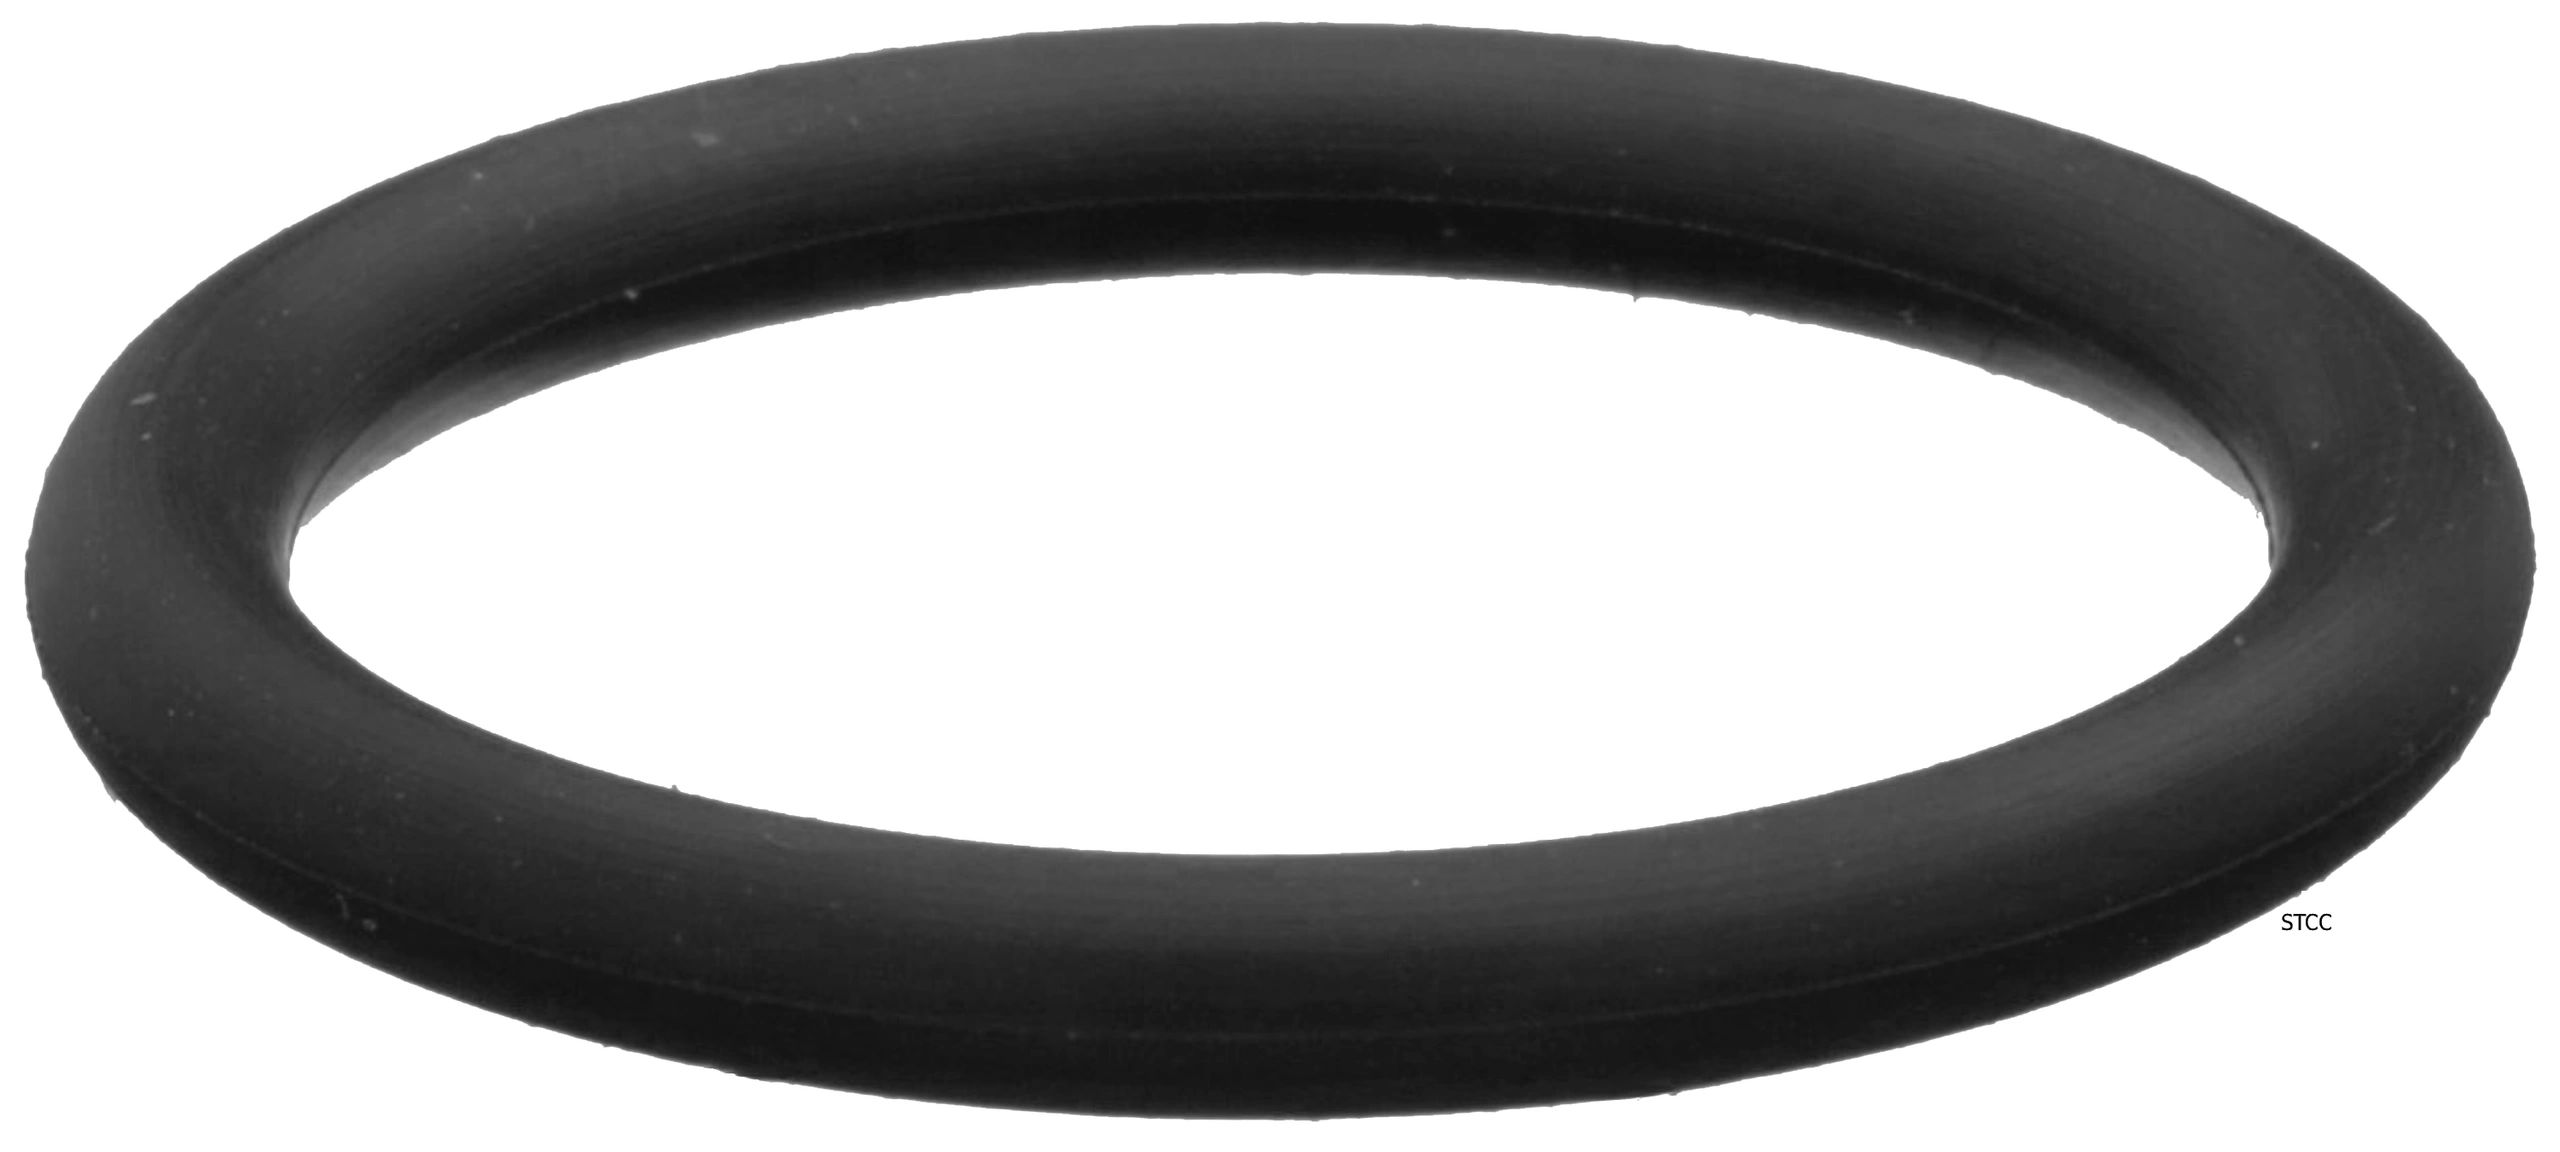 Pack of 50 Pack of 50 Pressure Class 150 1/8 Thick 18 ID 1/8 Thick 18 ID Sterling Seal CRG7157.1800.125.150X50 7157 EPDM 60 Durometer Ring Gasket 18 Pipe Size Assigned by Sur-Seal Inc of NJ.